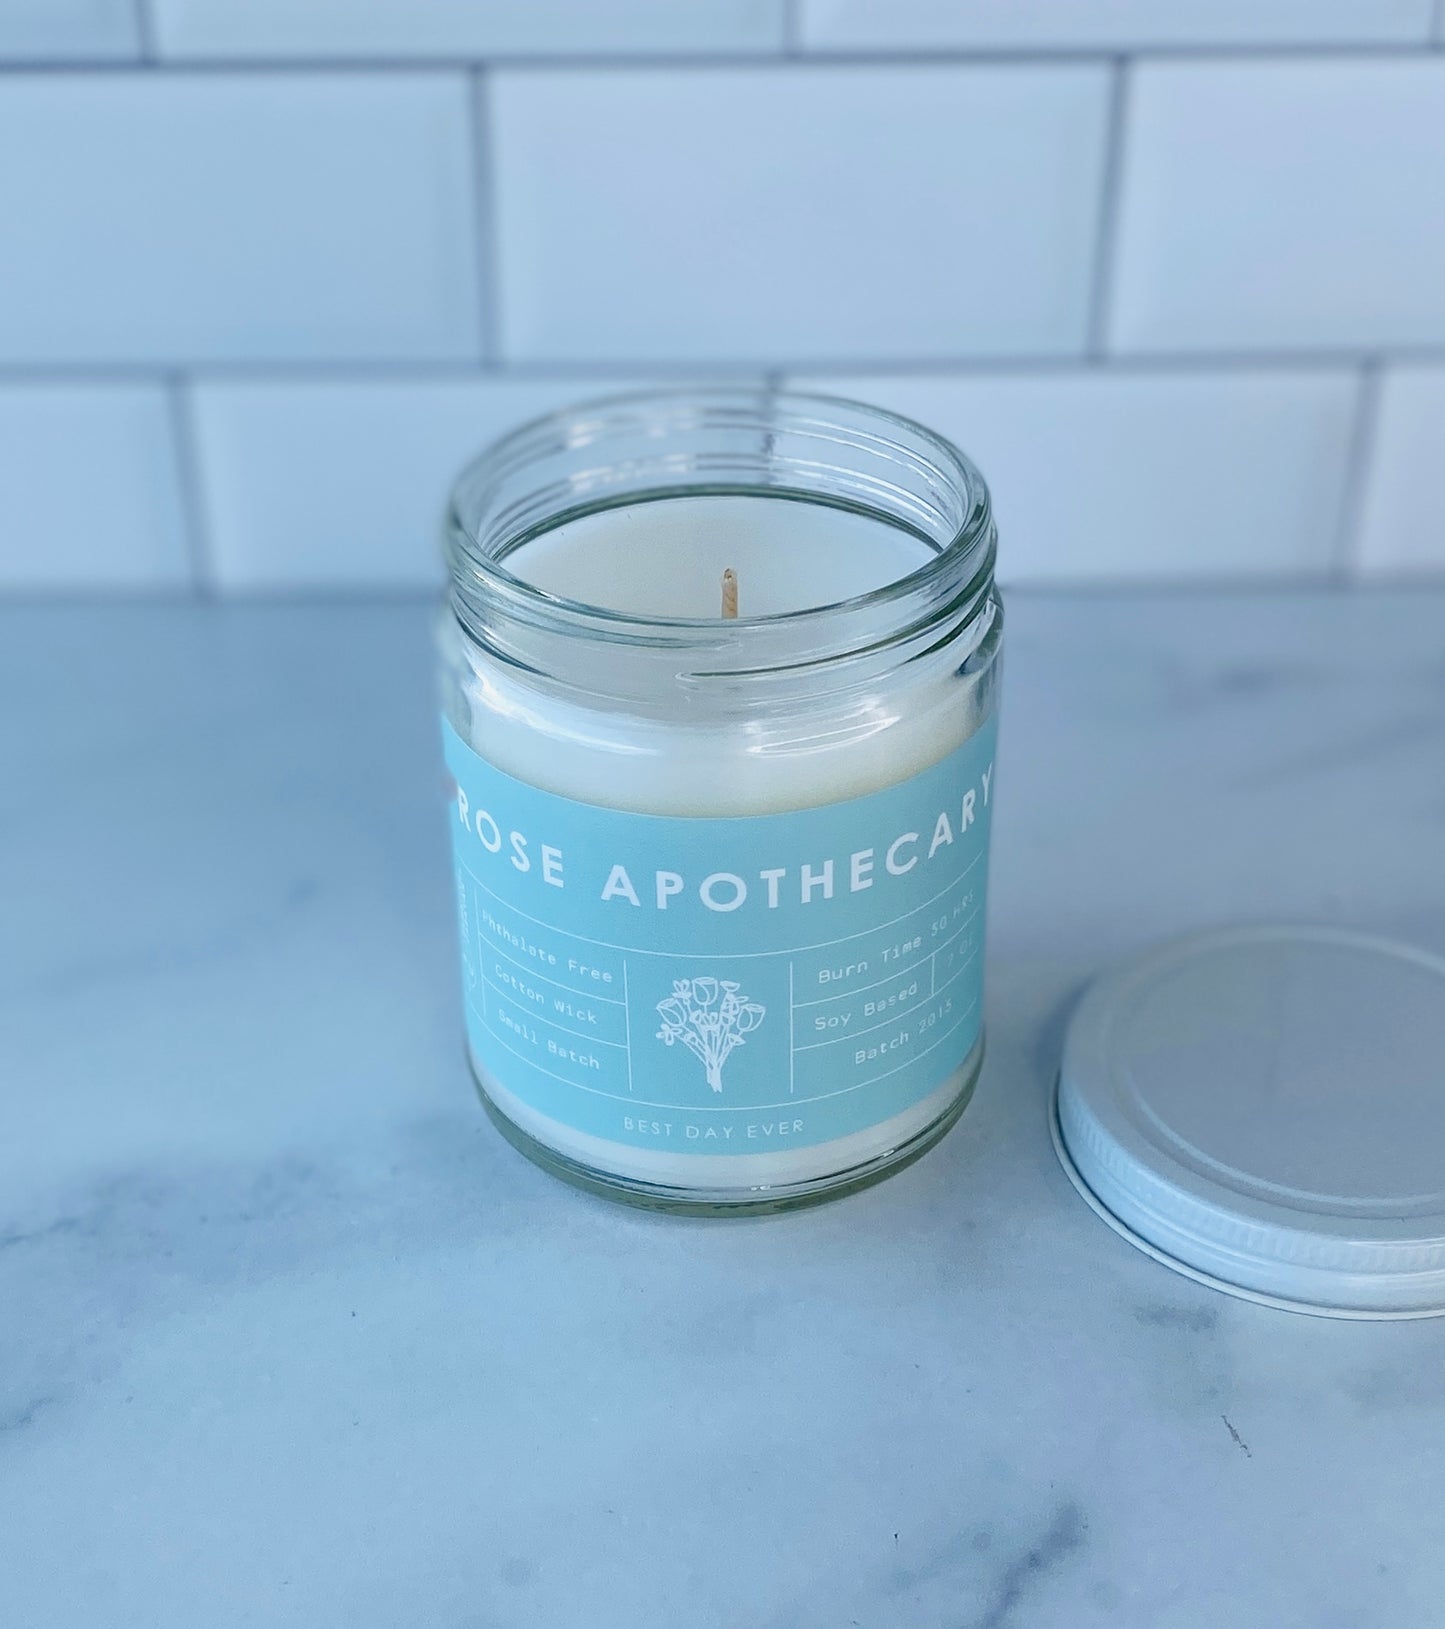 Rose Apothecary Candle